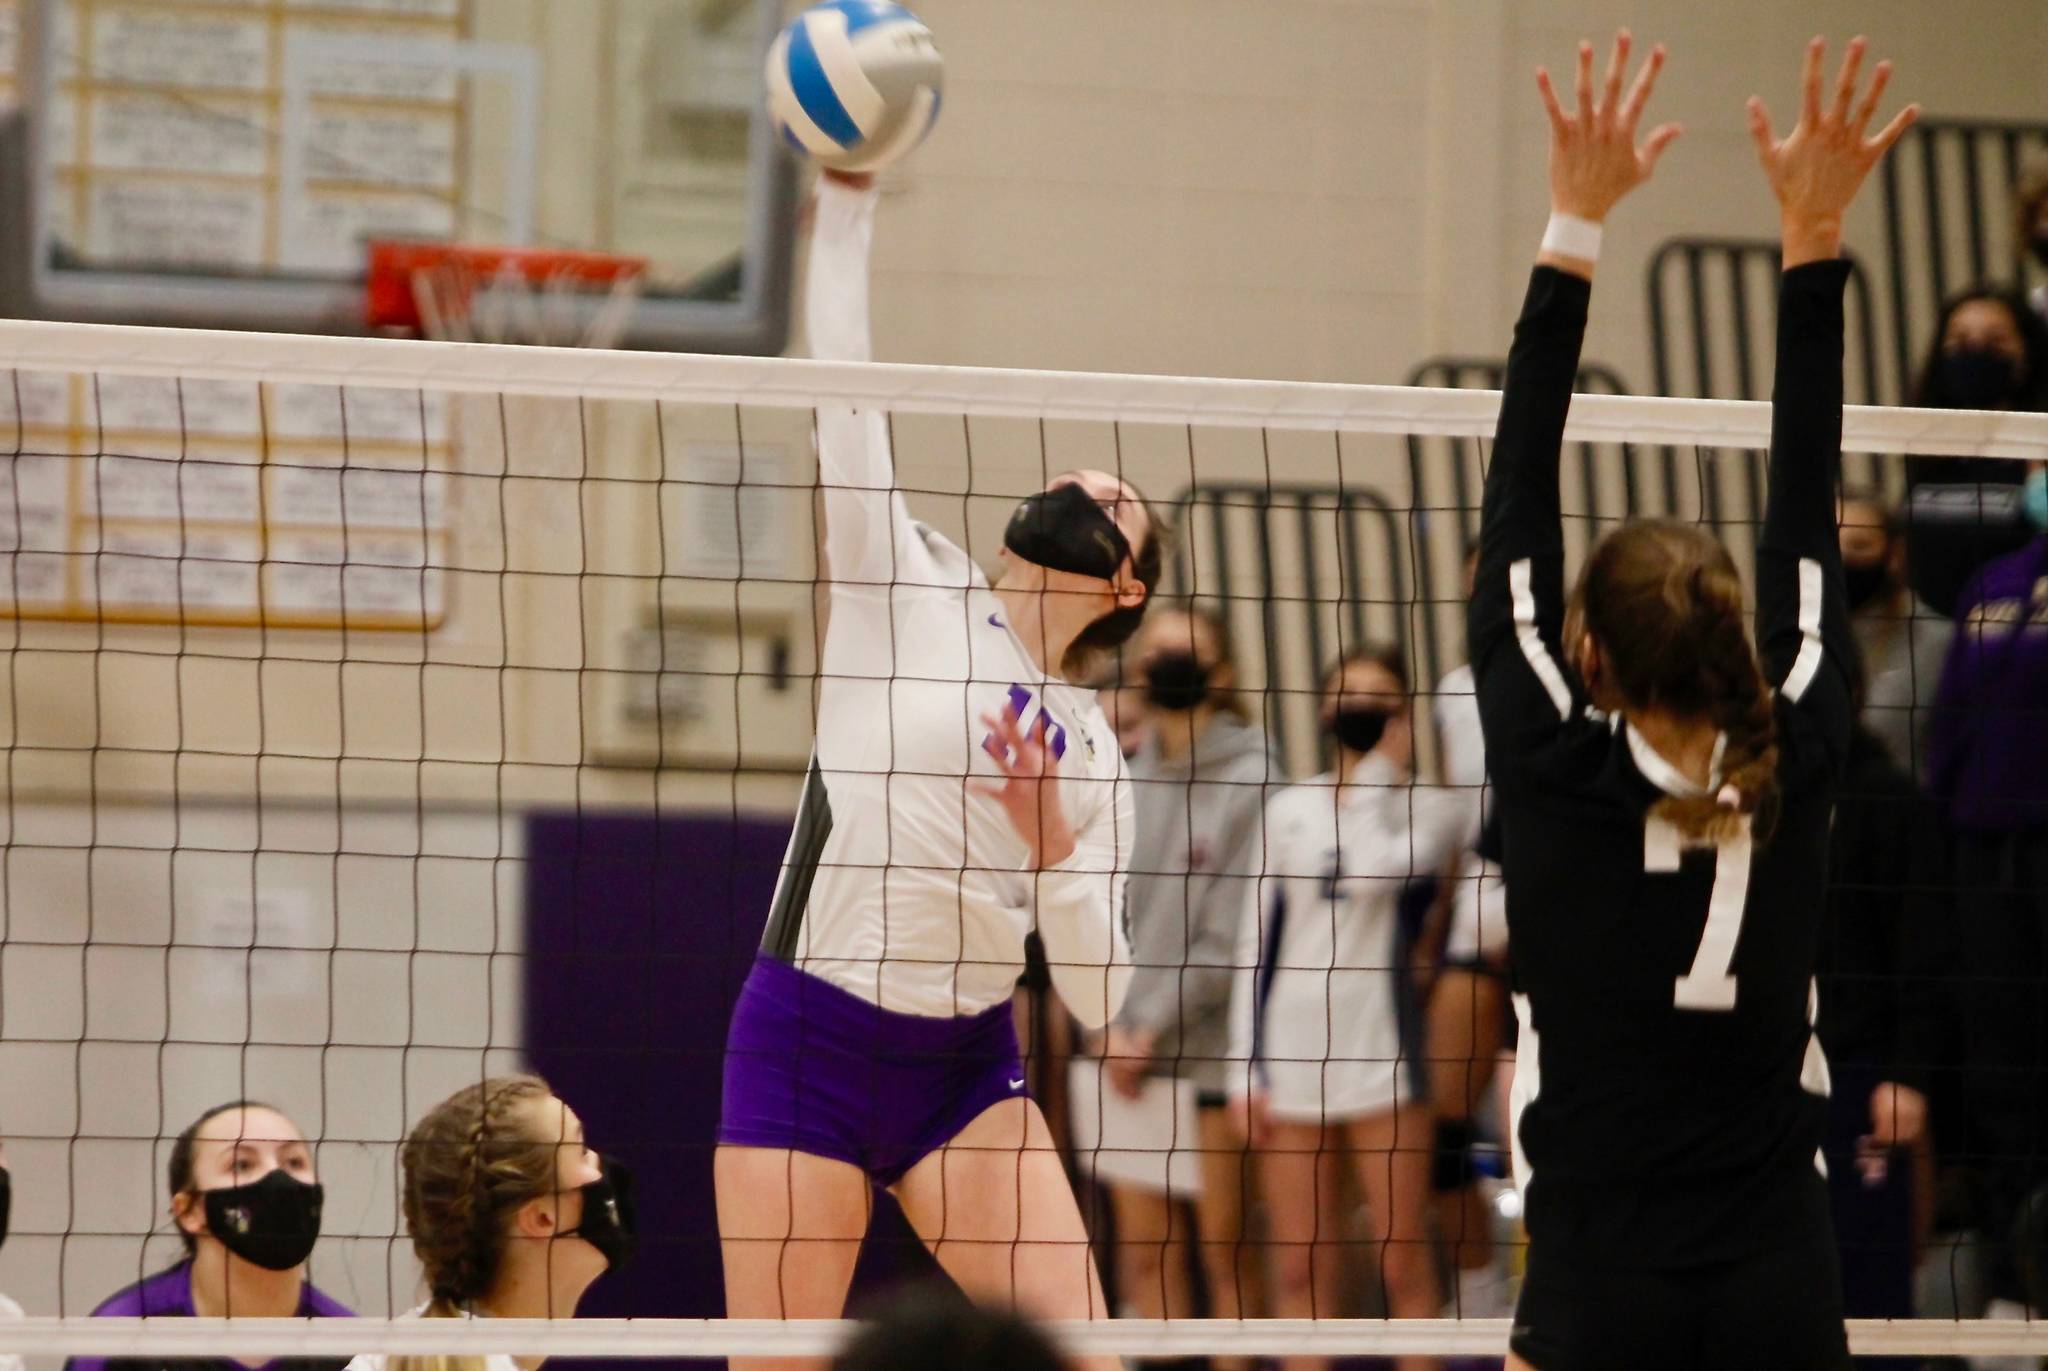 Riley Rabedeaux comes up with one of her 24 kills against Central Kitsap. (Mark Krulish/Kitsap News Group)